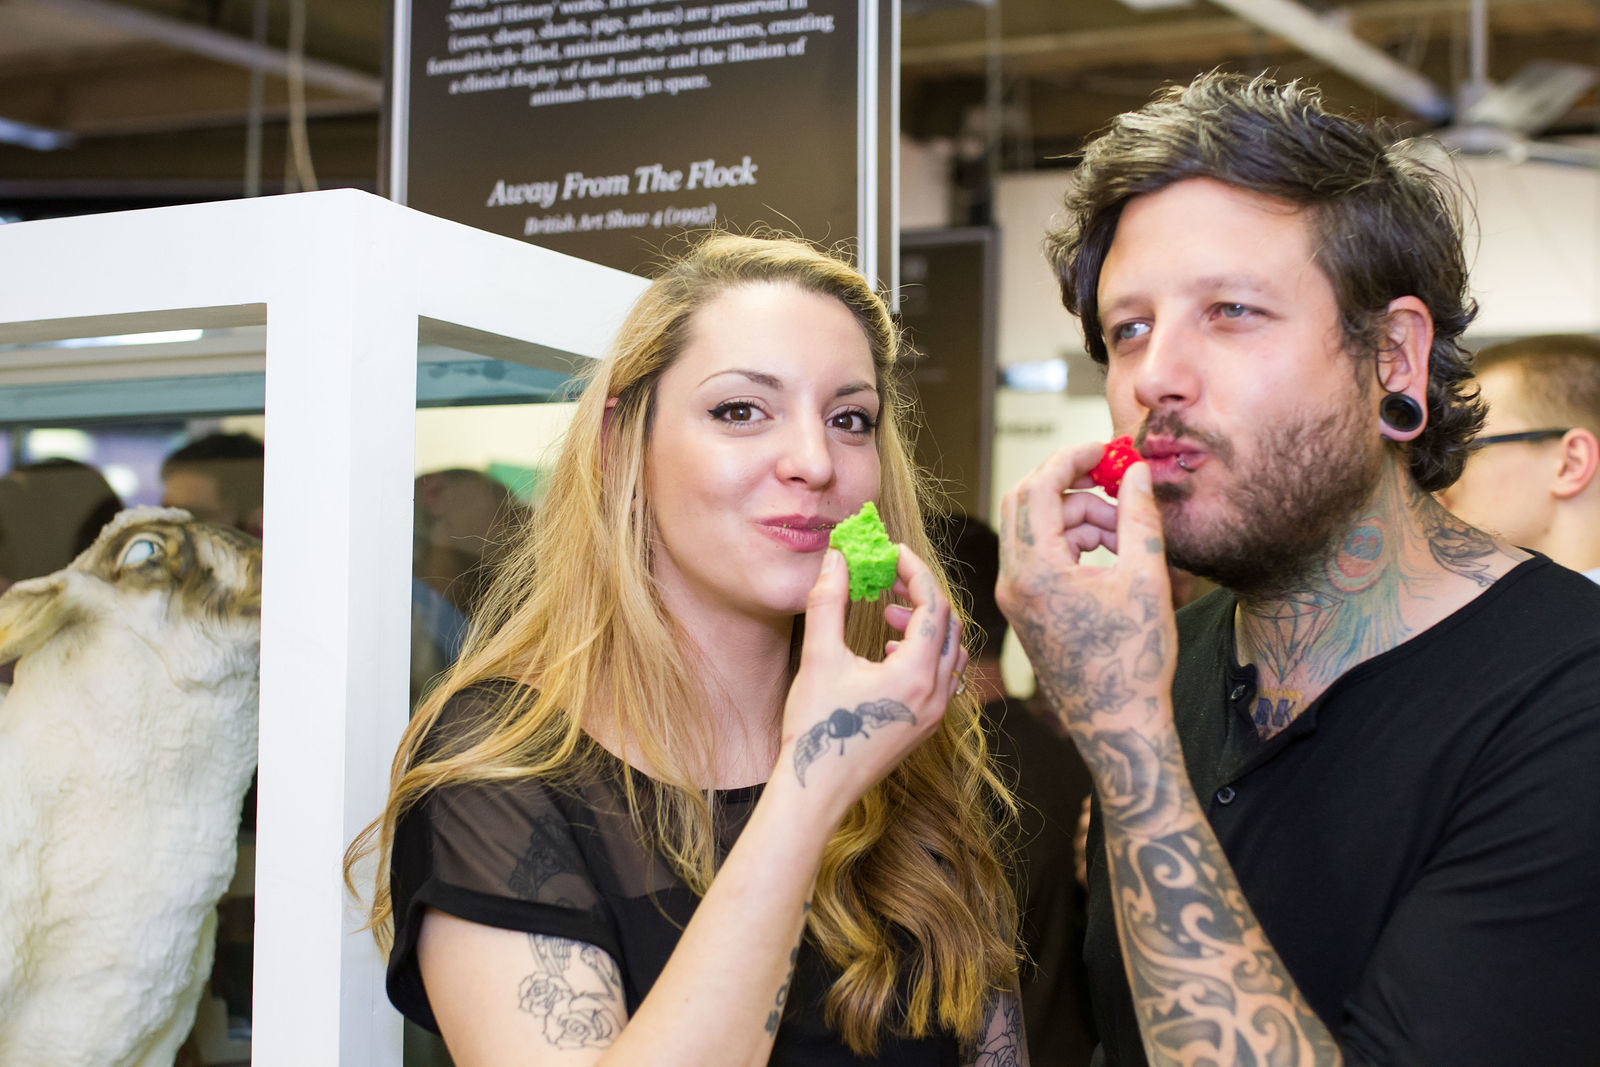 #LIF15: The Great Edible Art Show: Eat the Art